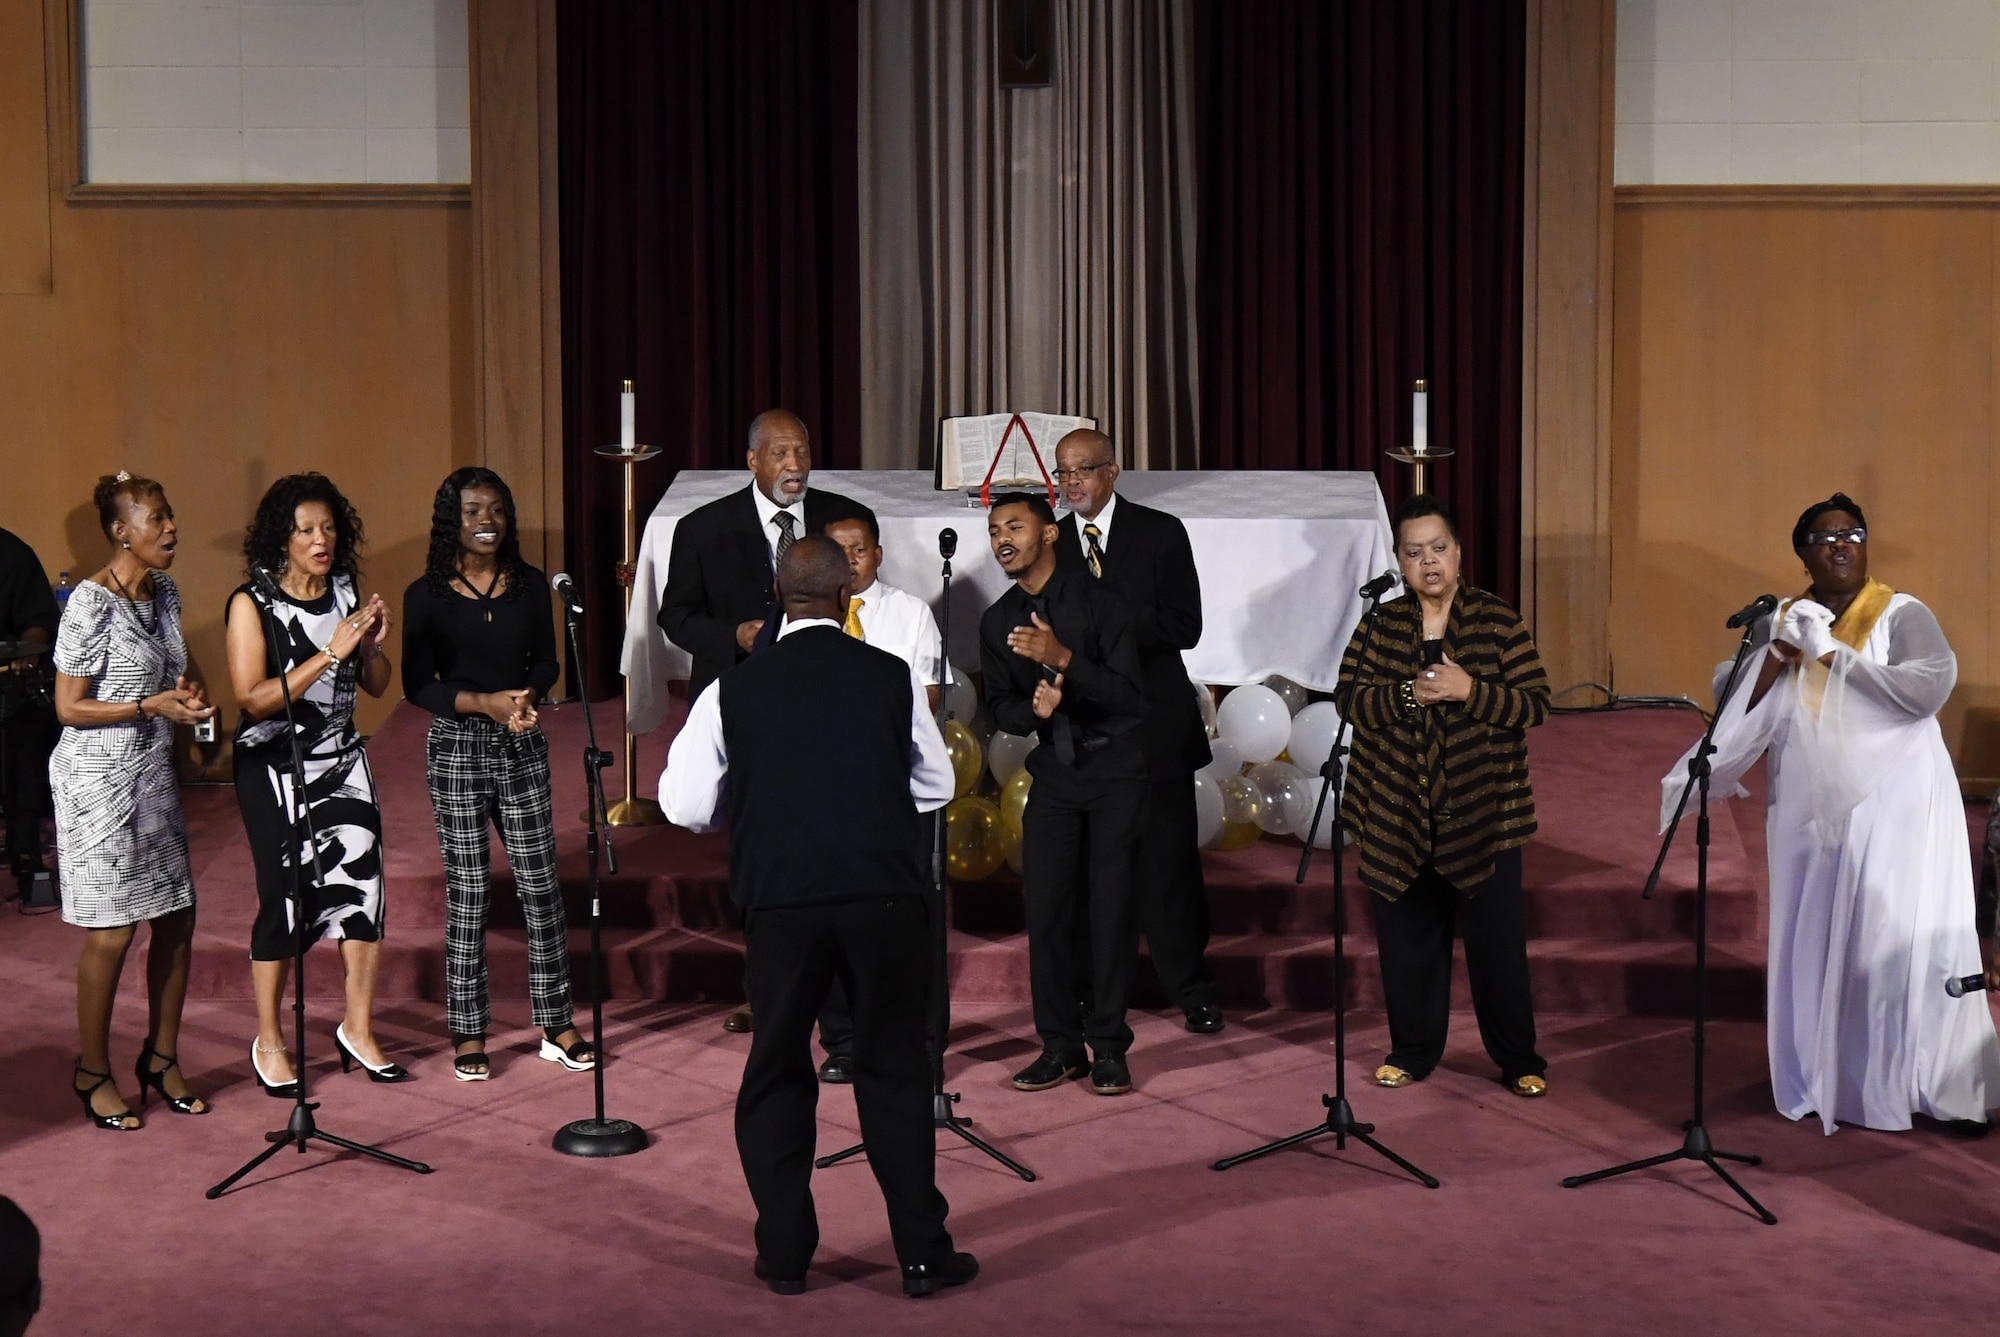 Minister Dennis Thompson leads the Gospel Choir in a song during the 50th Gospel Worship Service Anniversary inside Larcher Chapel at Keesler Air Force Base, Mississippi, Sept. 12, 2021. The service's theme was "Growing Stronger, Growing Deeper, Reaching Higher." (U.S. Air Force photo by Kemberly Groue)